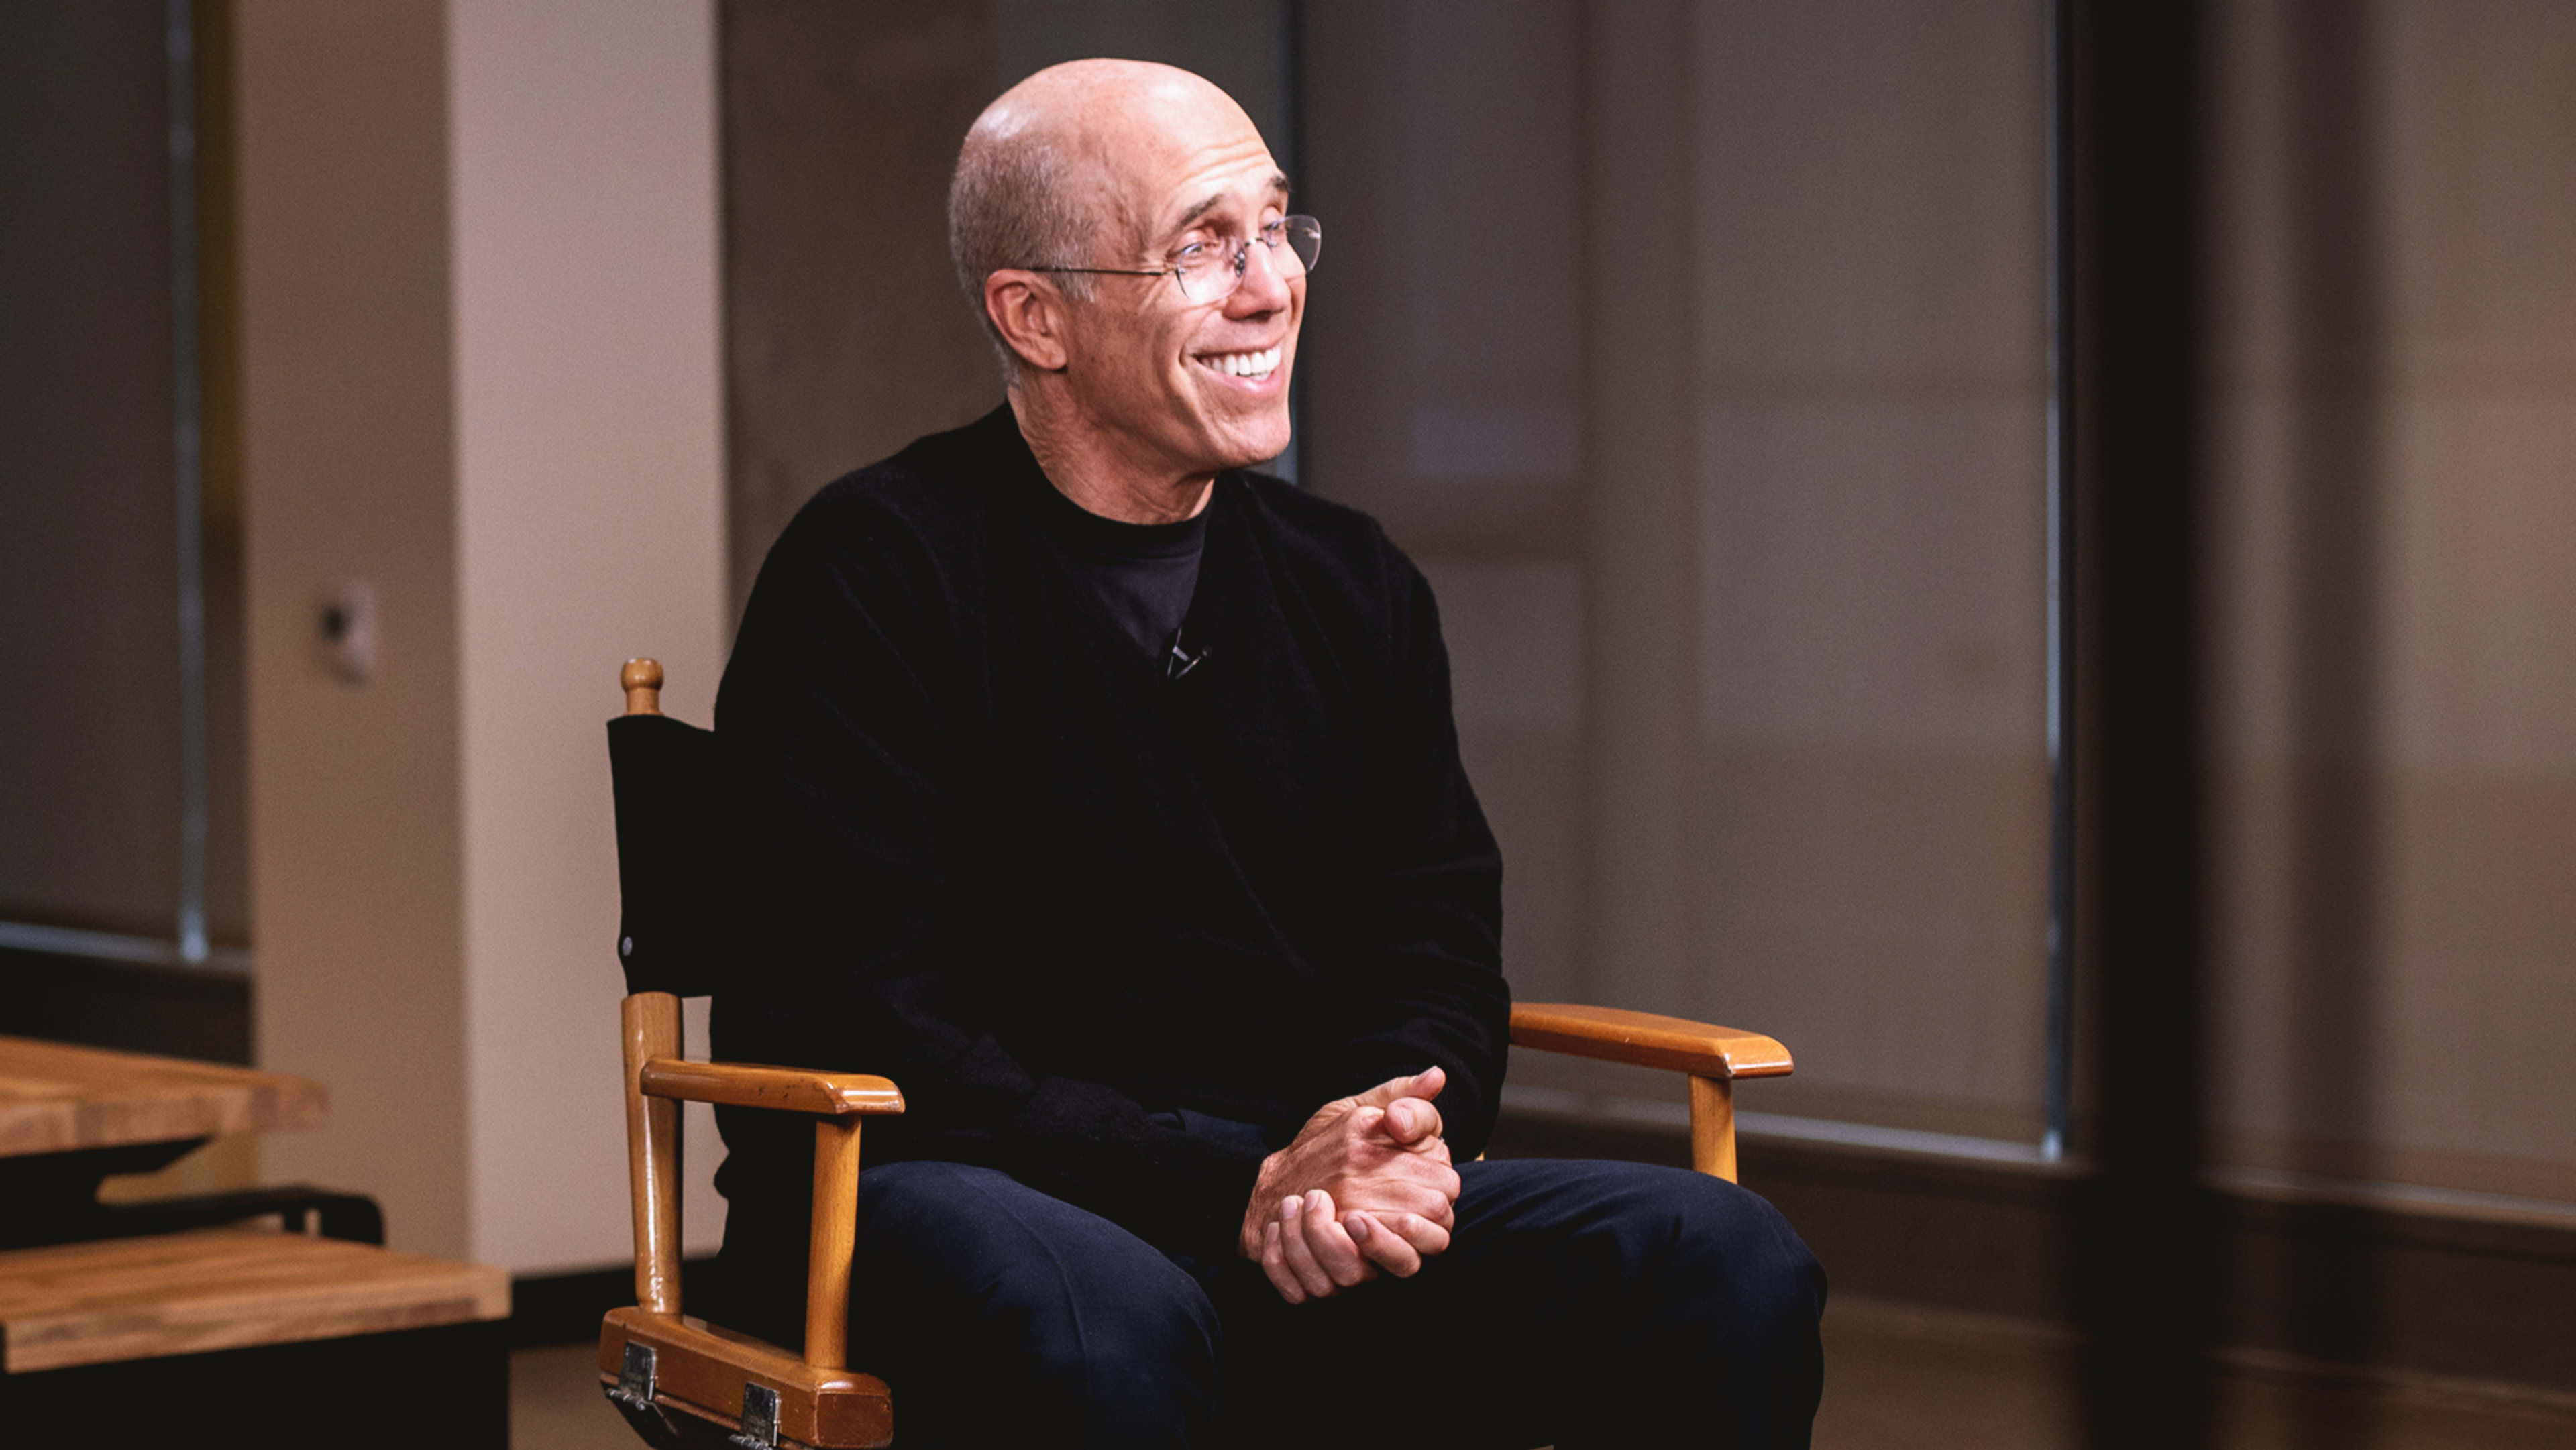 Jeffrey Katzenberg reveals that Quibi will have telenovelas, the Snapchat story, and more–in April 2020